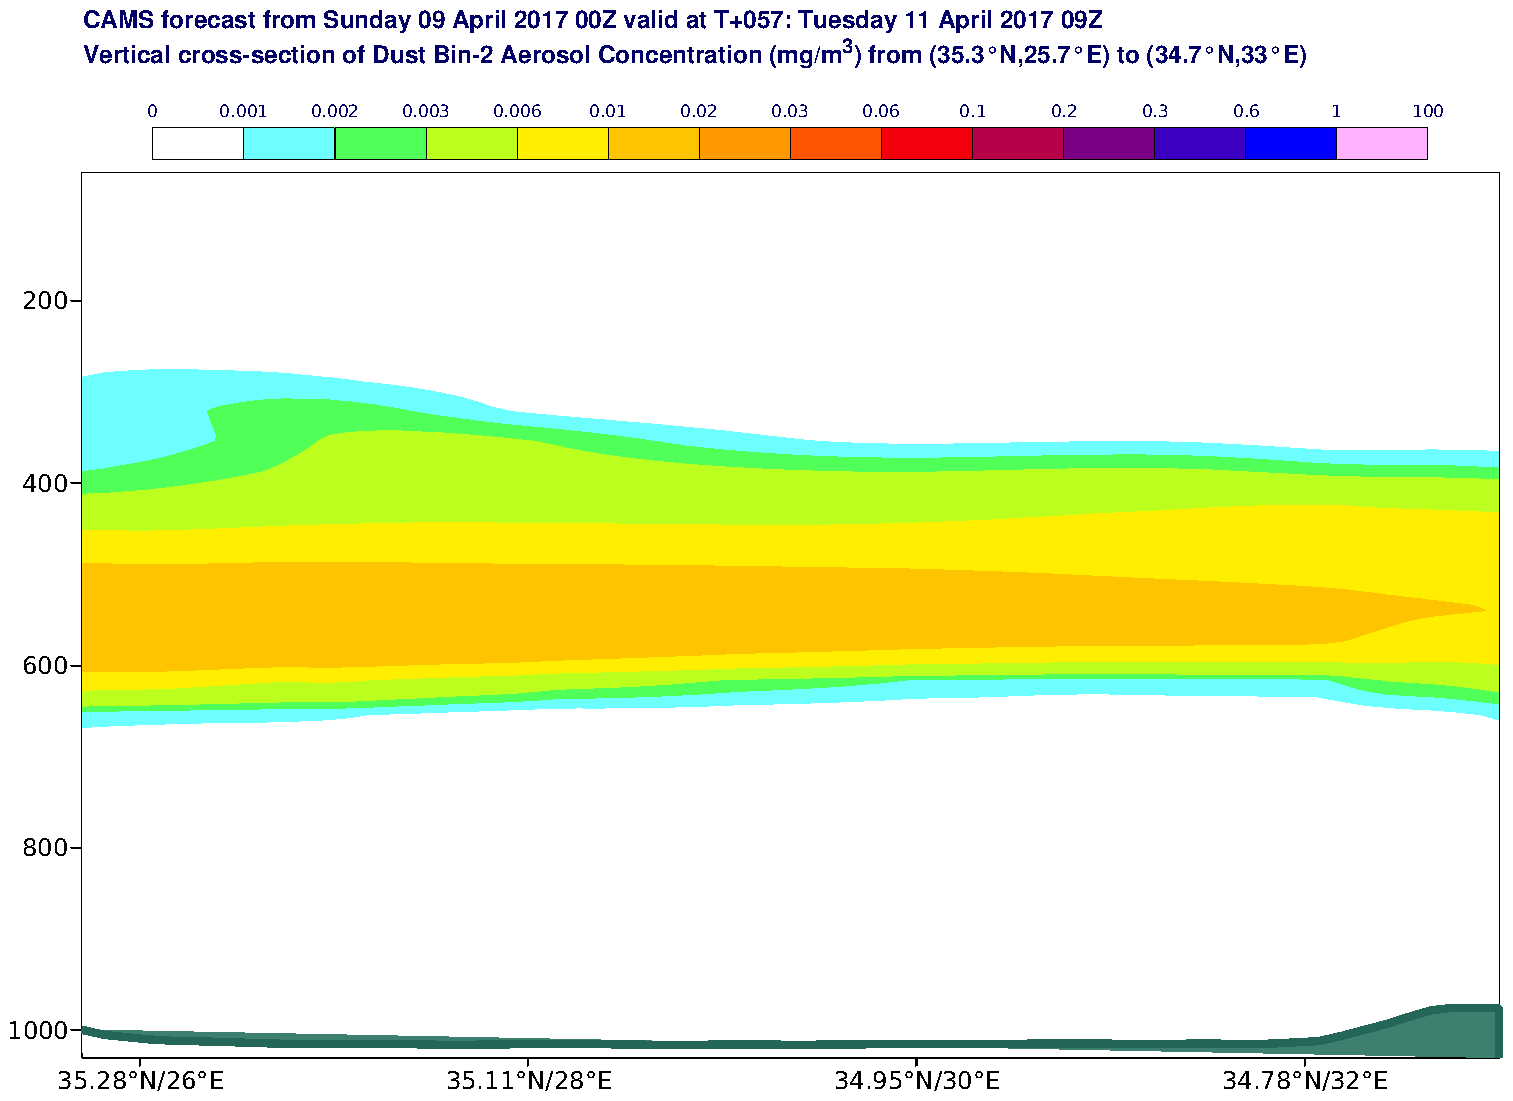 Vertical cross-section of Dust Bin-2 Aerosol Concentration (mg/m3) valid at T57 - 2017-04-11 09:00